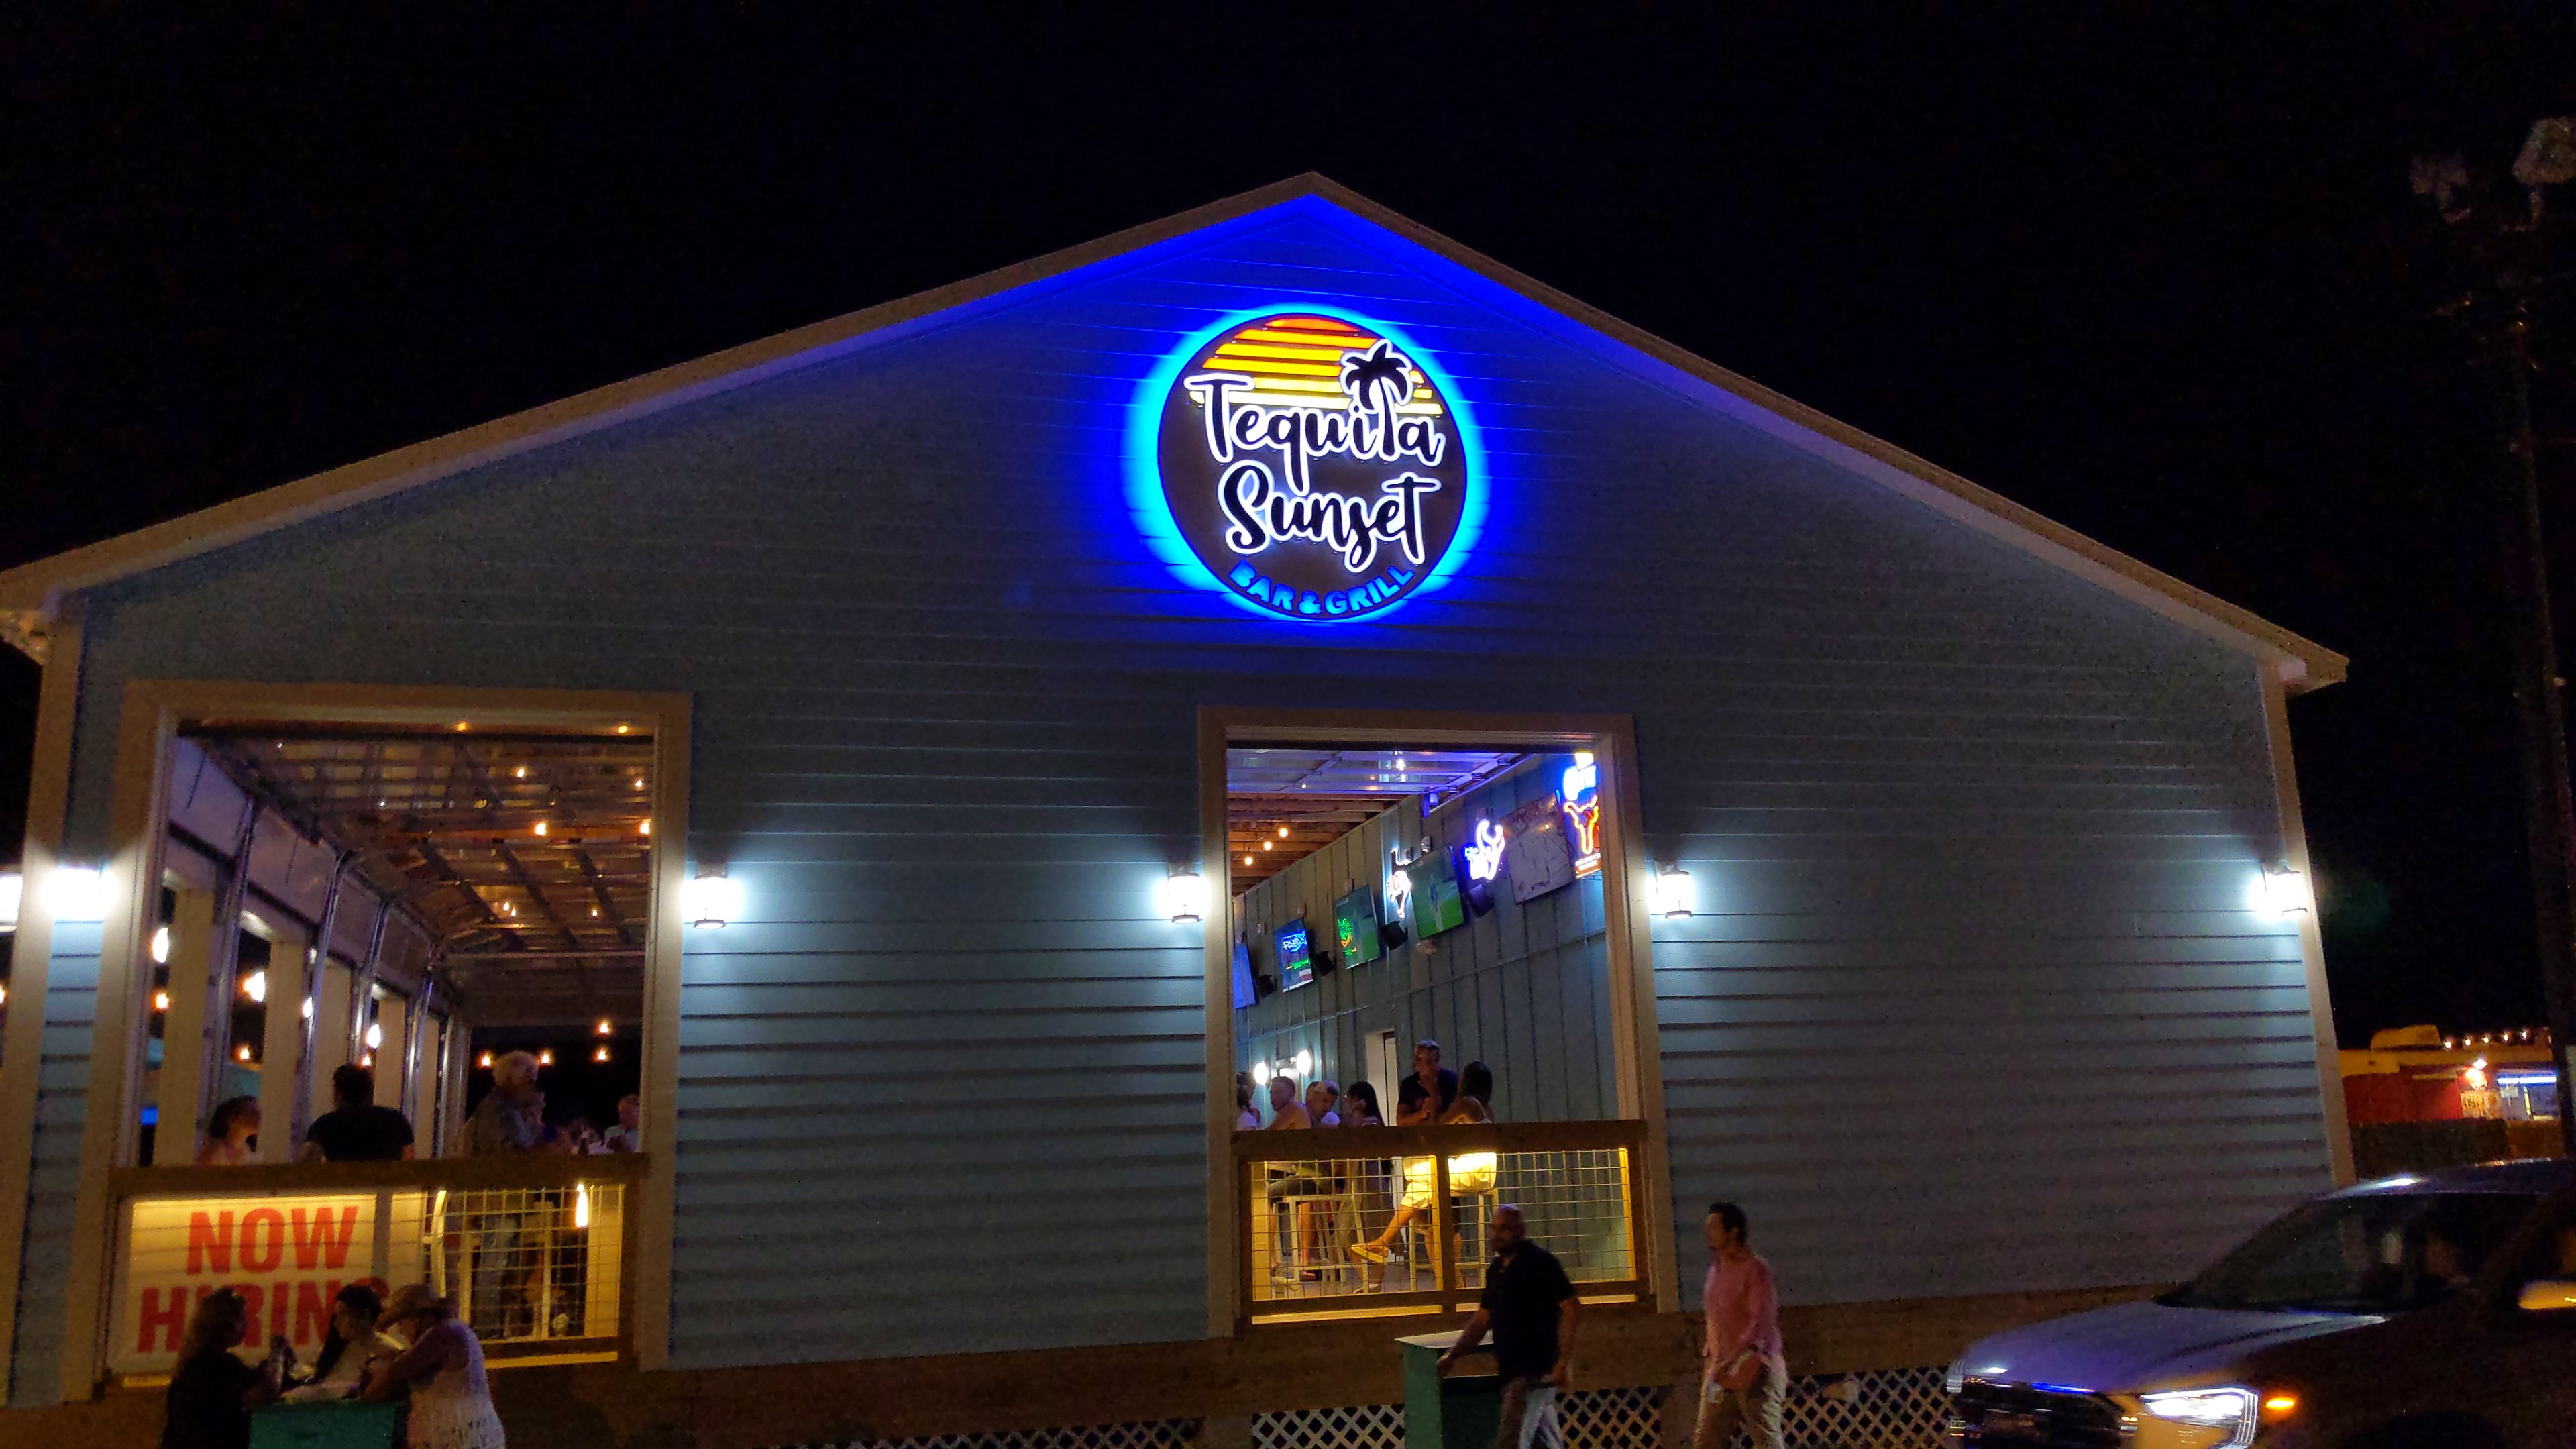 Crafted a radiant, inviting sign for Tequila Sunset, enhancing its night-time allure and customer appeal.